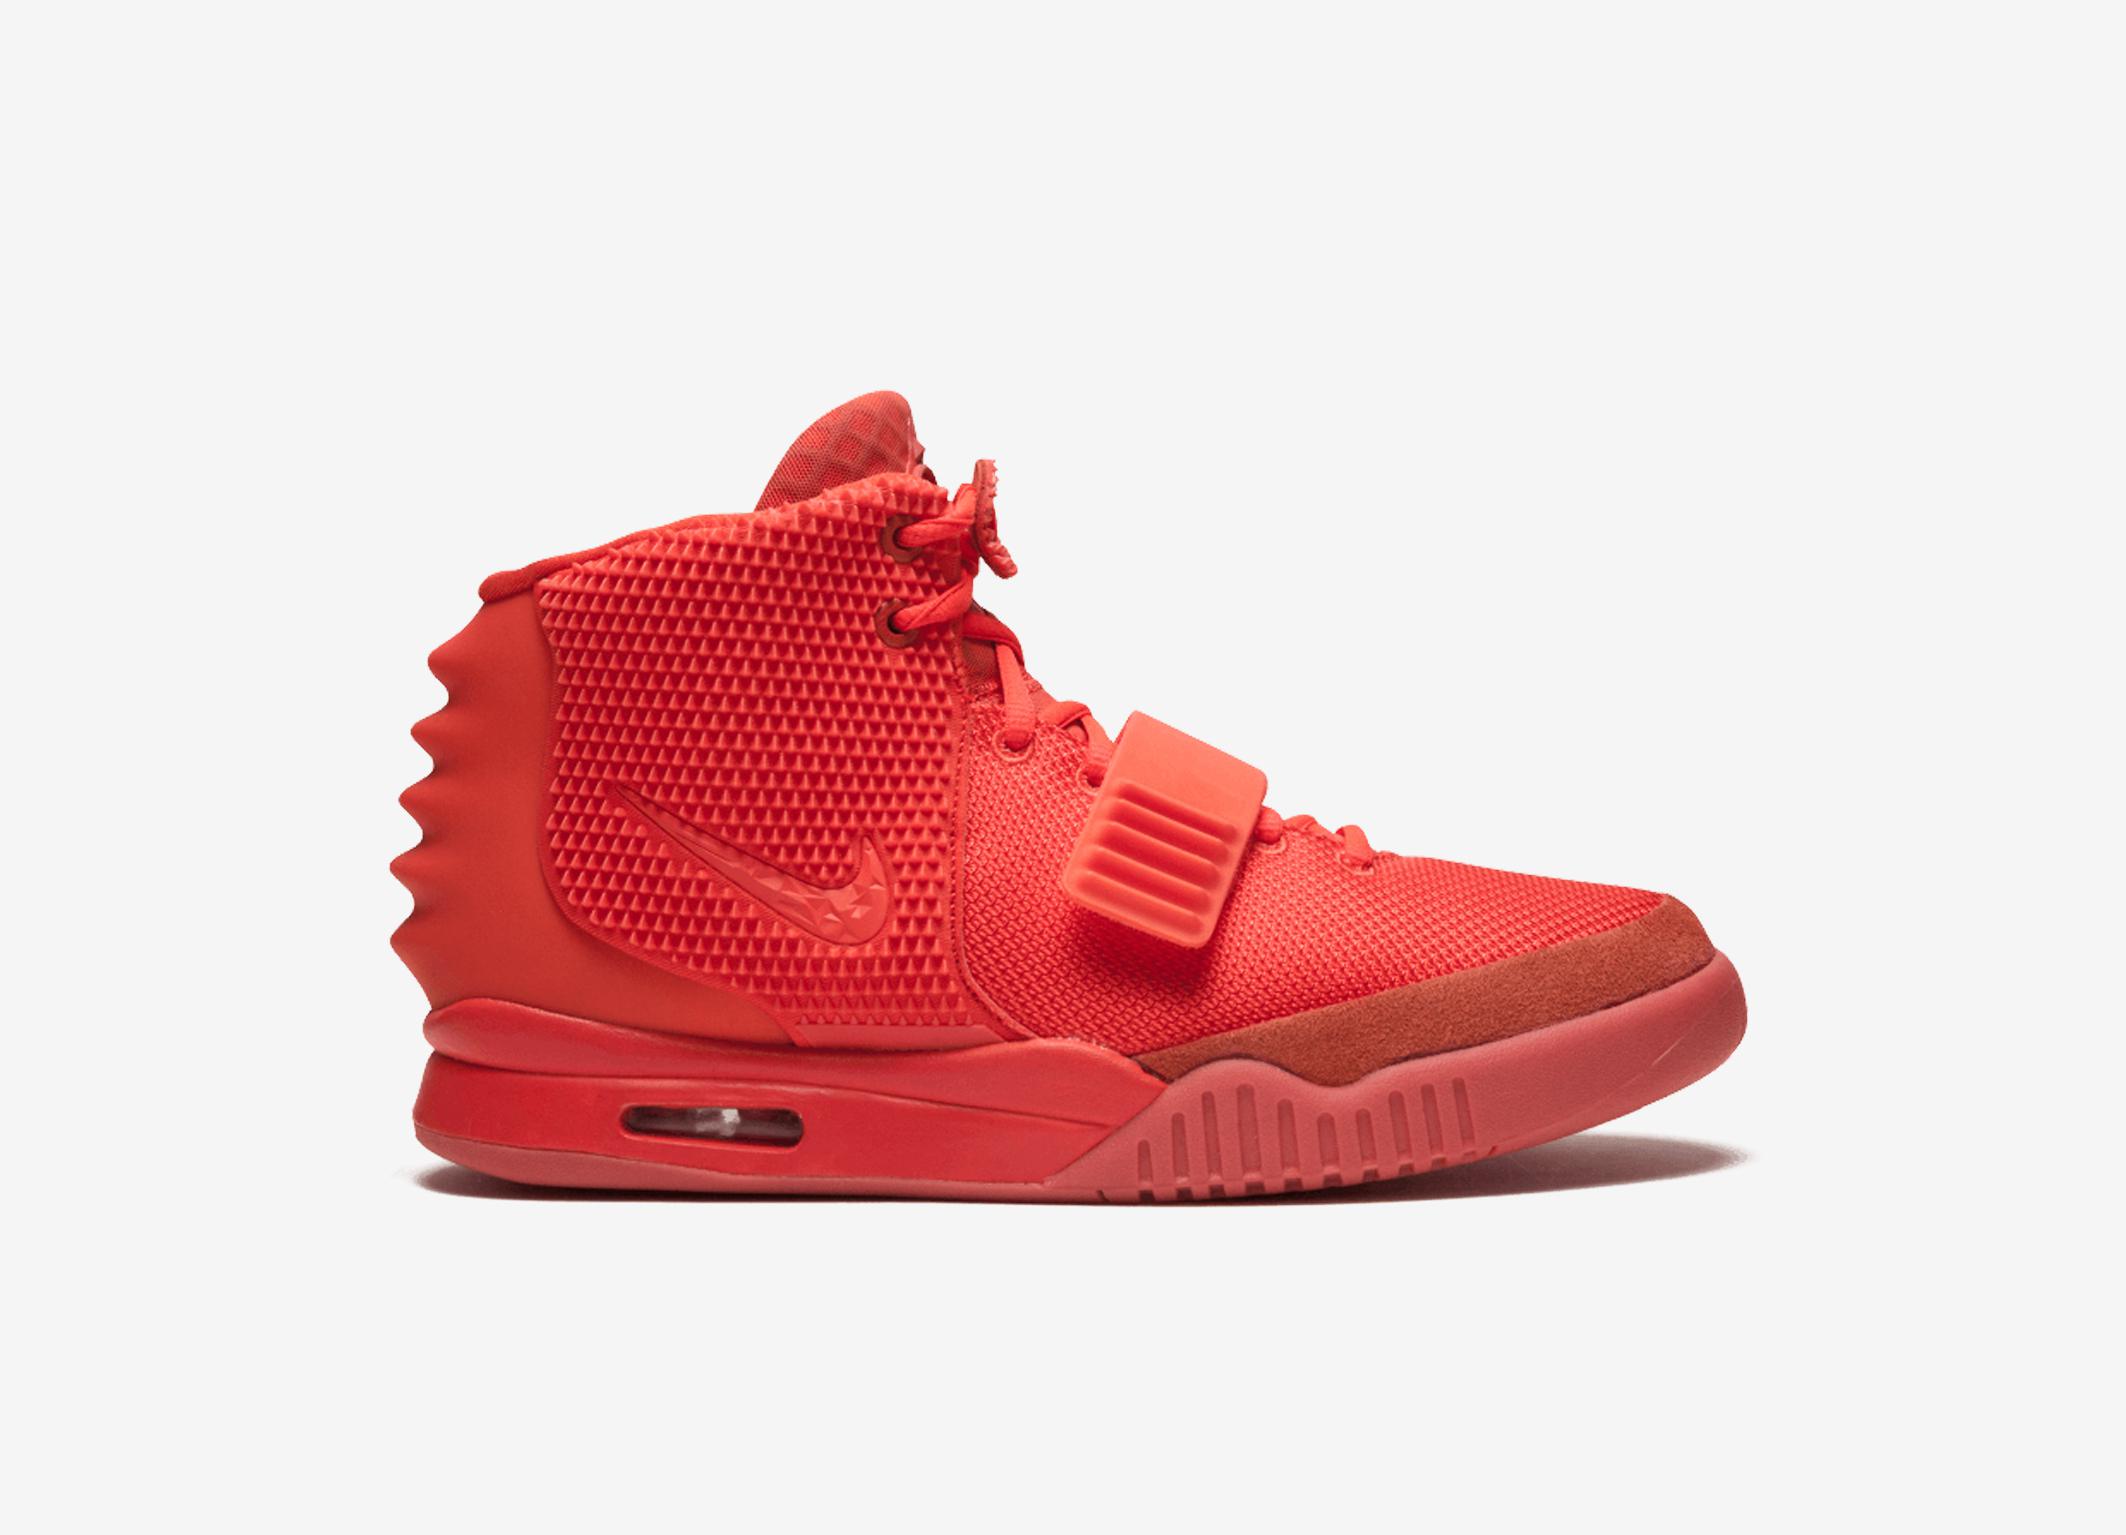 NIKE Air Yeezy 2 Red October